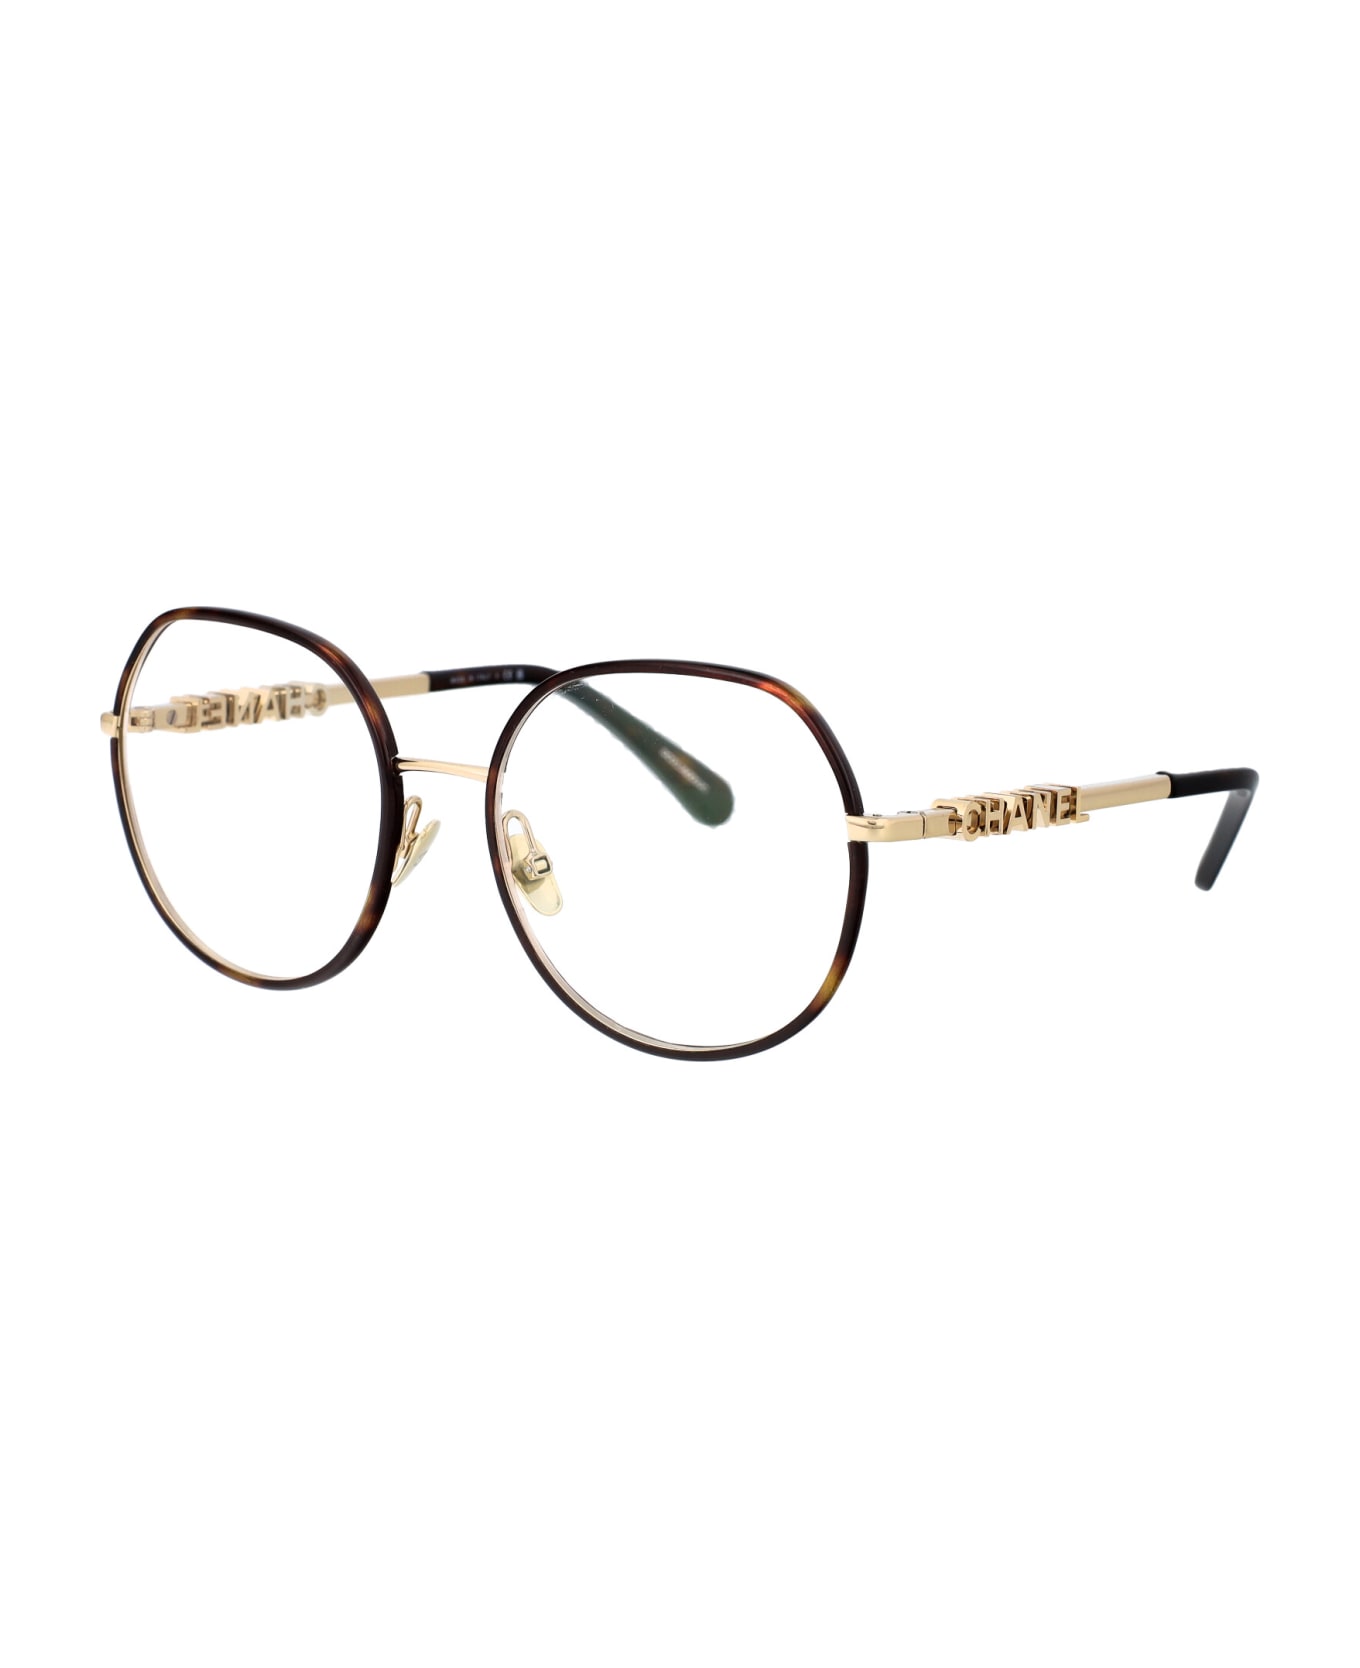 Chanel 0ch2213 Glasses - C429 BROWN